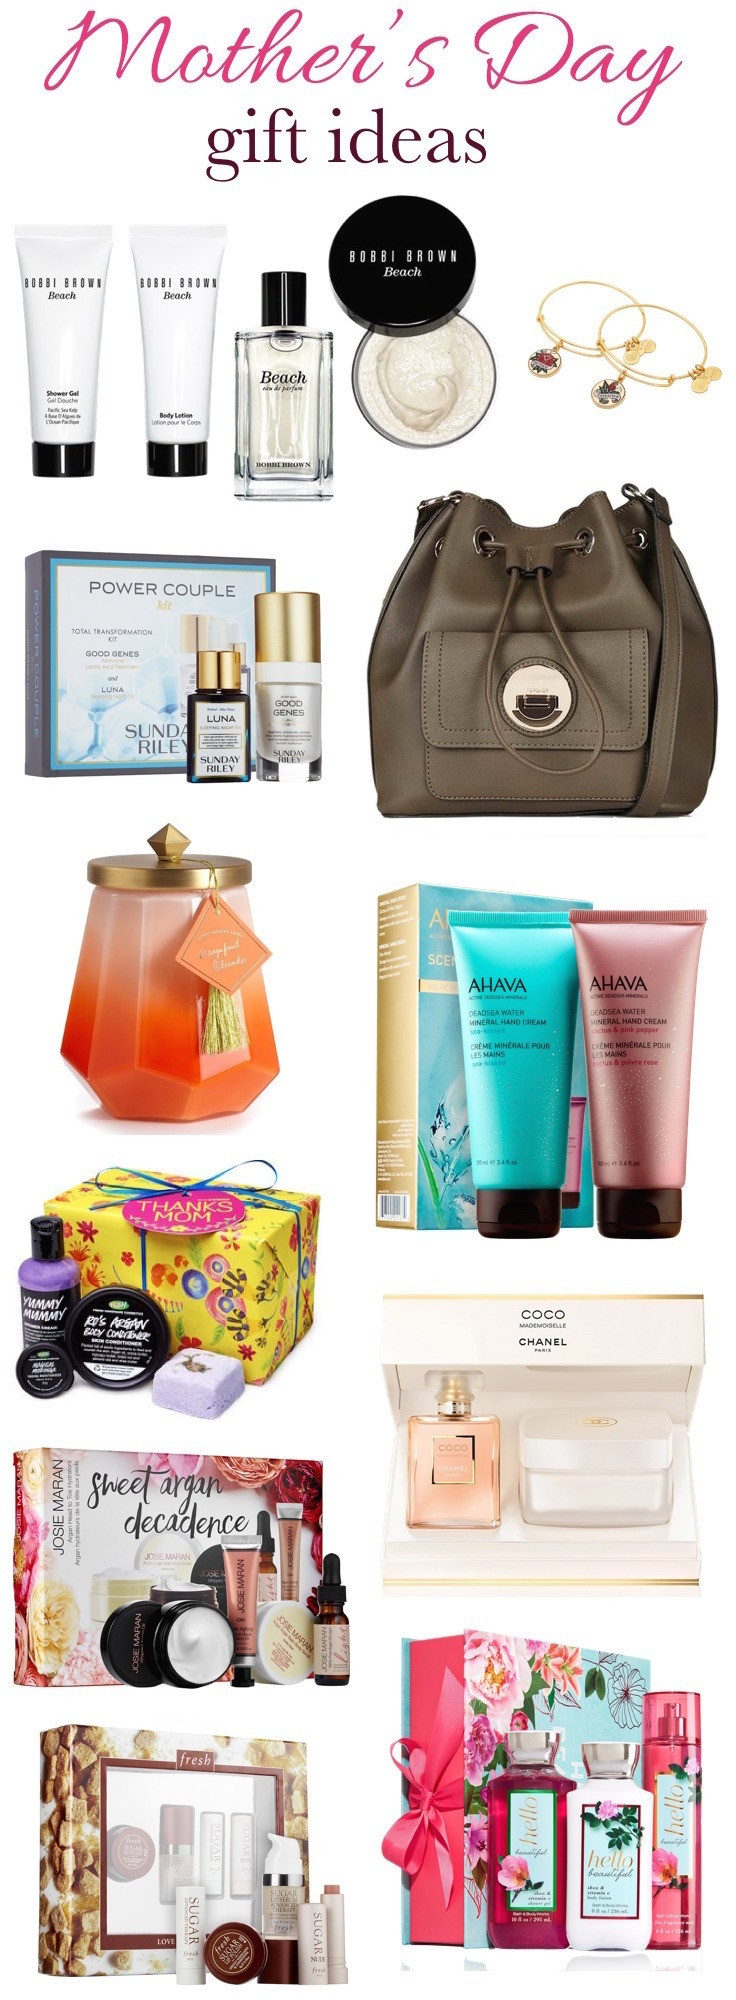 Mothers Day Gift Ideas For Wife
 Mother s Day Gifts That Primp & Pamper Under $100